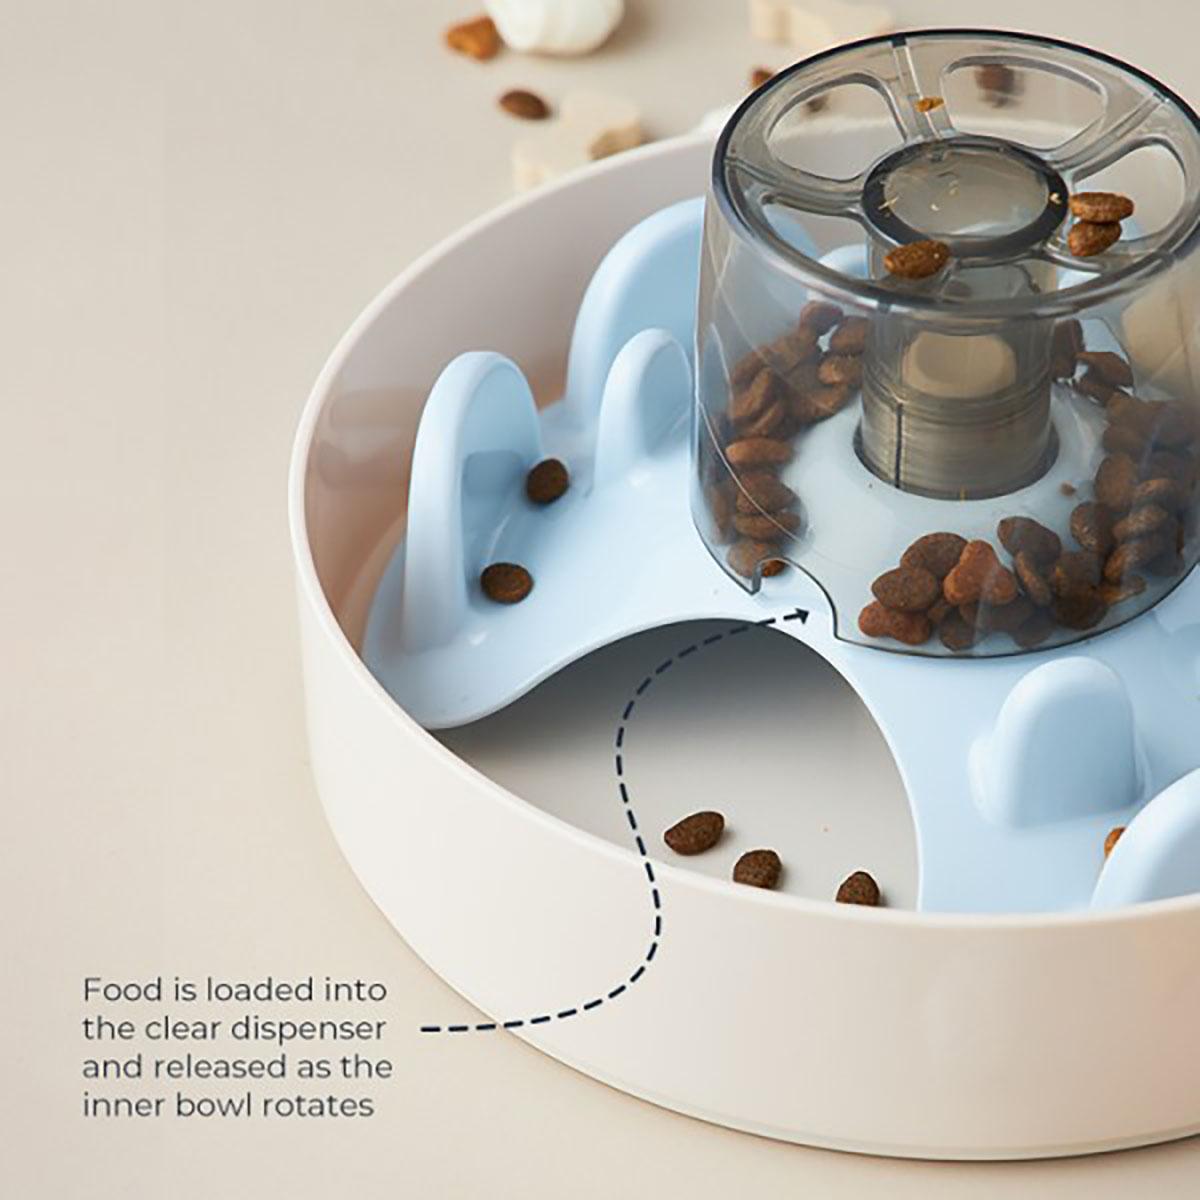 https://images.baxterboo.com/global/images/products/large/petdreamhouse-spin-interactive-slow-feeder-pet-bowl-ufo-blue-5899.jpg